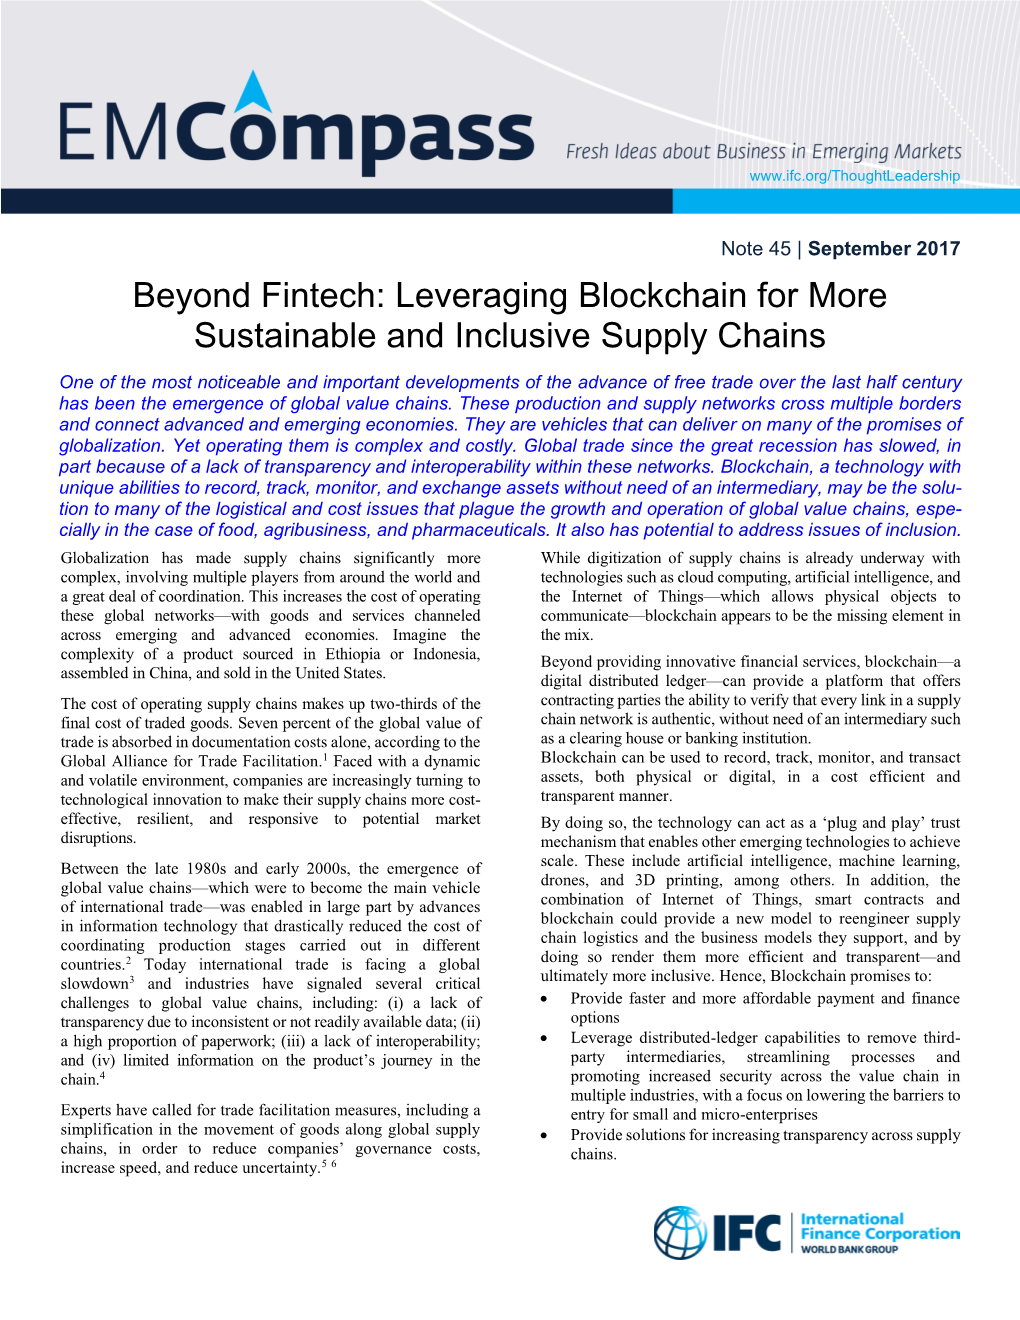 Leveraging Blockchain for More Sustainable and Inclusive Supply Chains